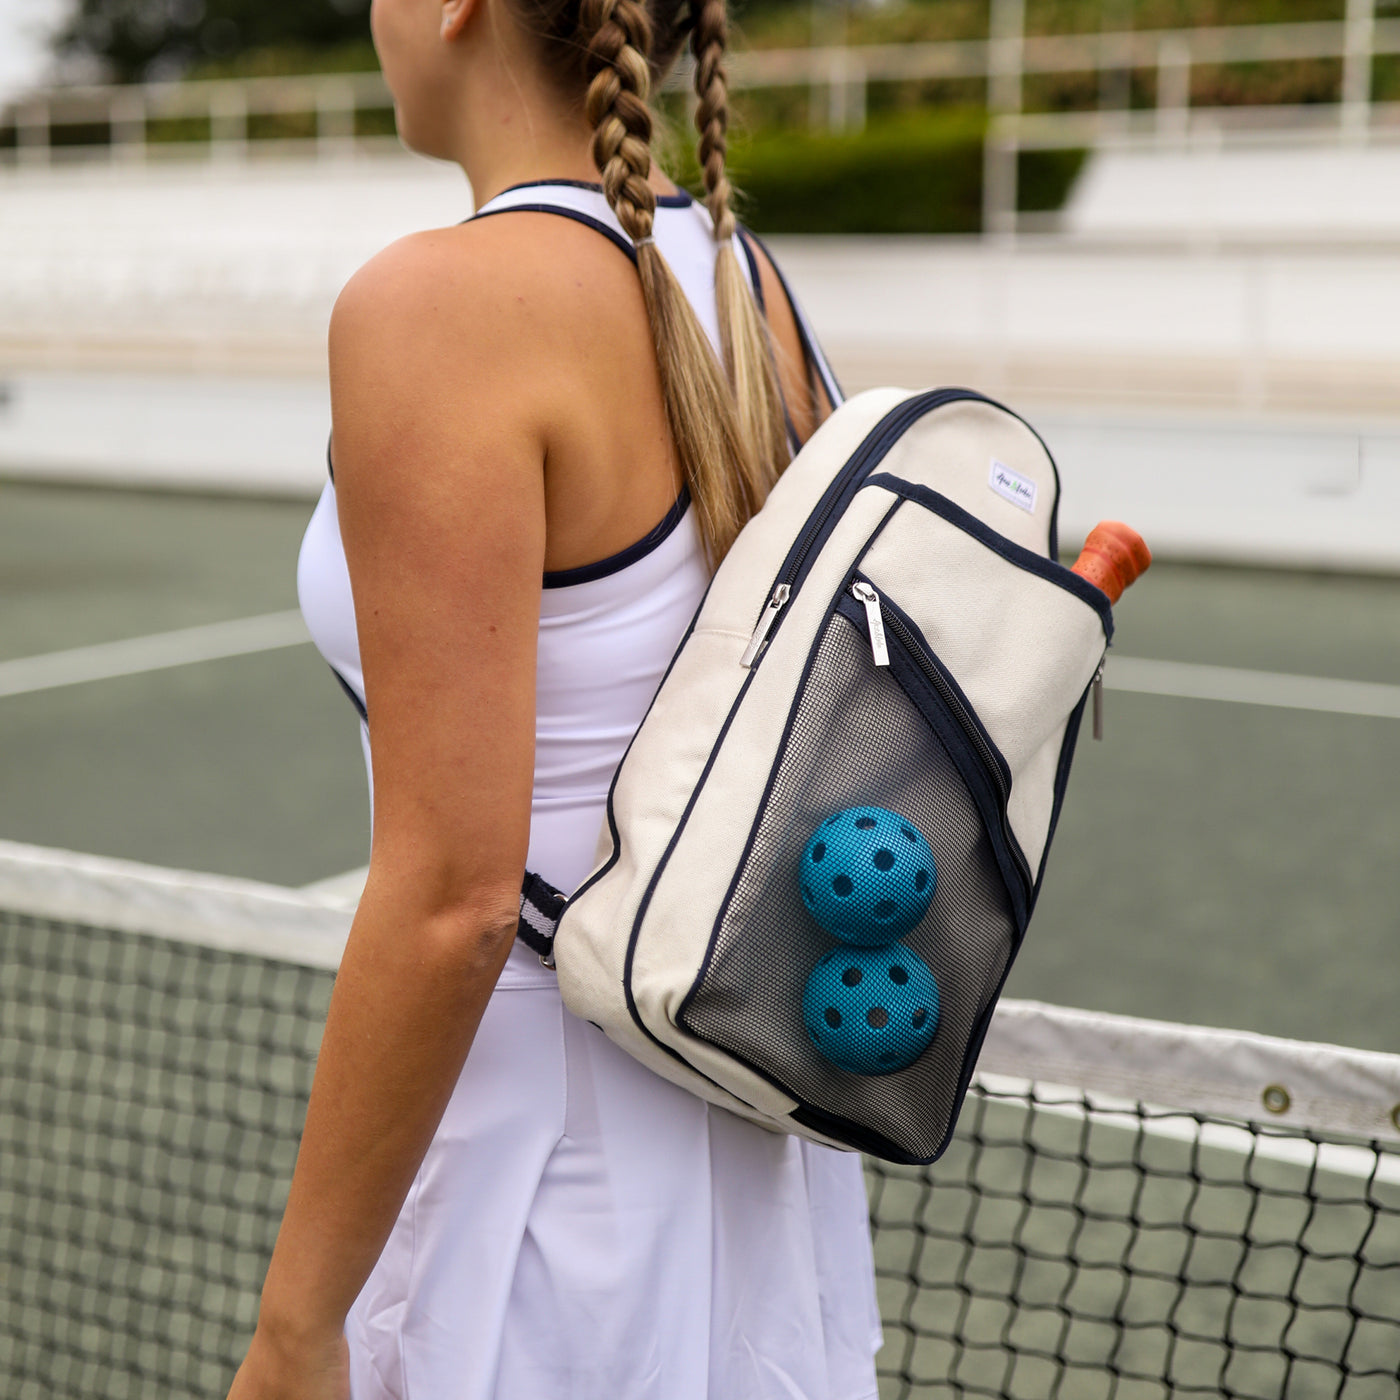 Model wears Hamptons pickleball sling bag. Bag has front mesh pocket and slip pocket on front to hold pickleball paddles. Bag has navy trim and navy and white striped straps. Bag has adjustable straps to be worn as a backpack or a crossbody.